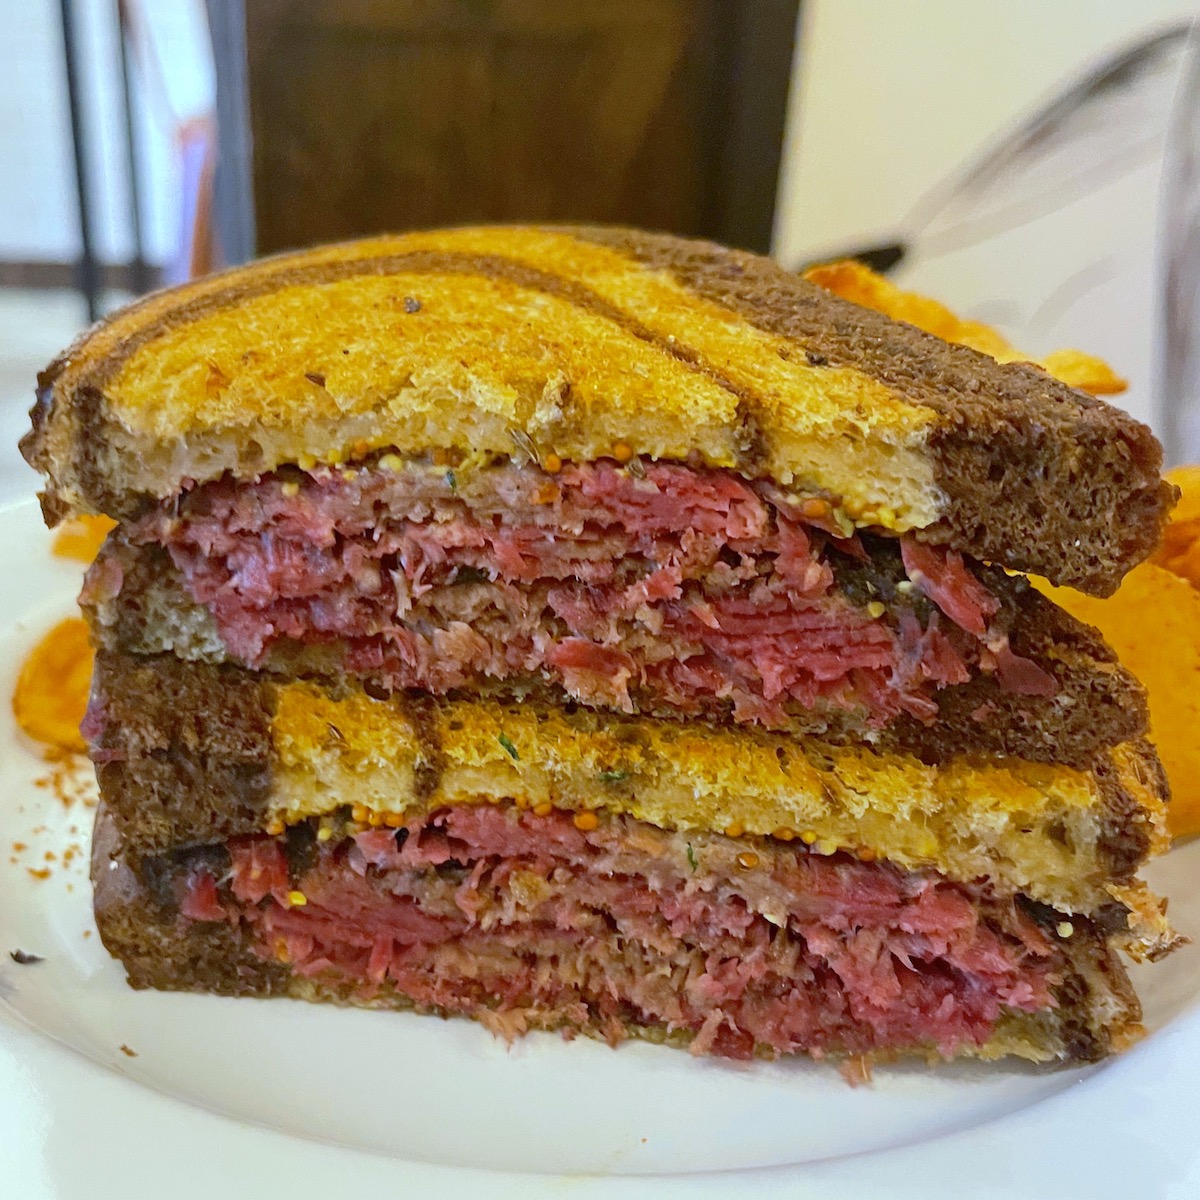 Pastrami Sandwich from Smoke and Dough in West Kendall, Florida